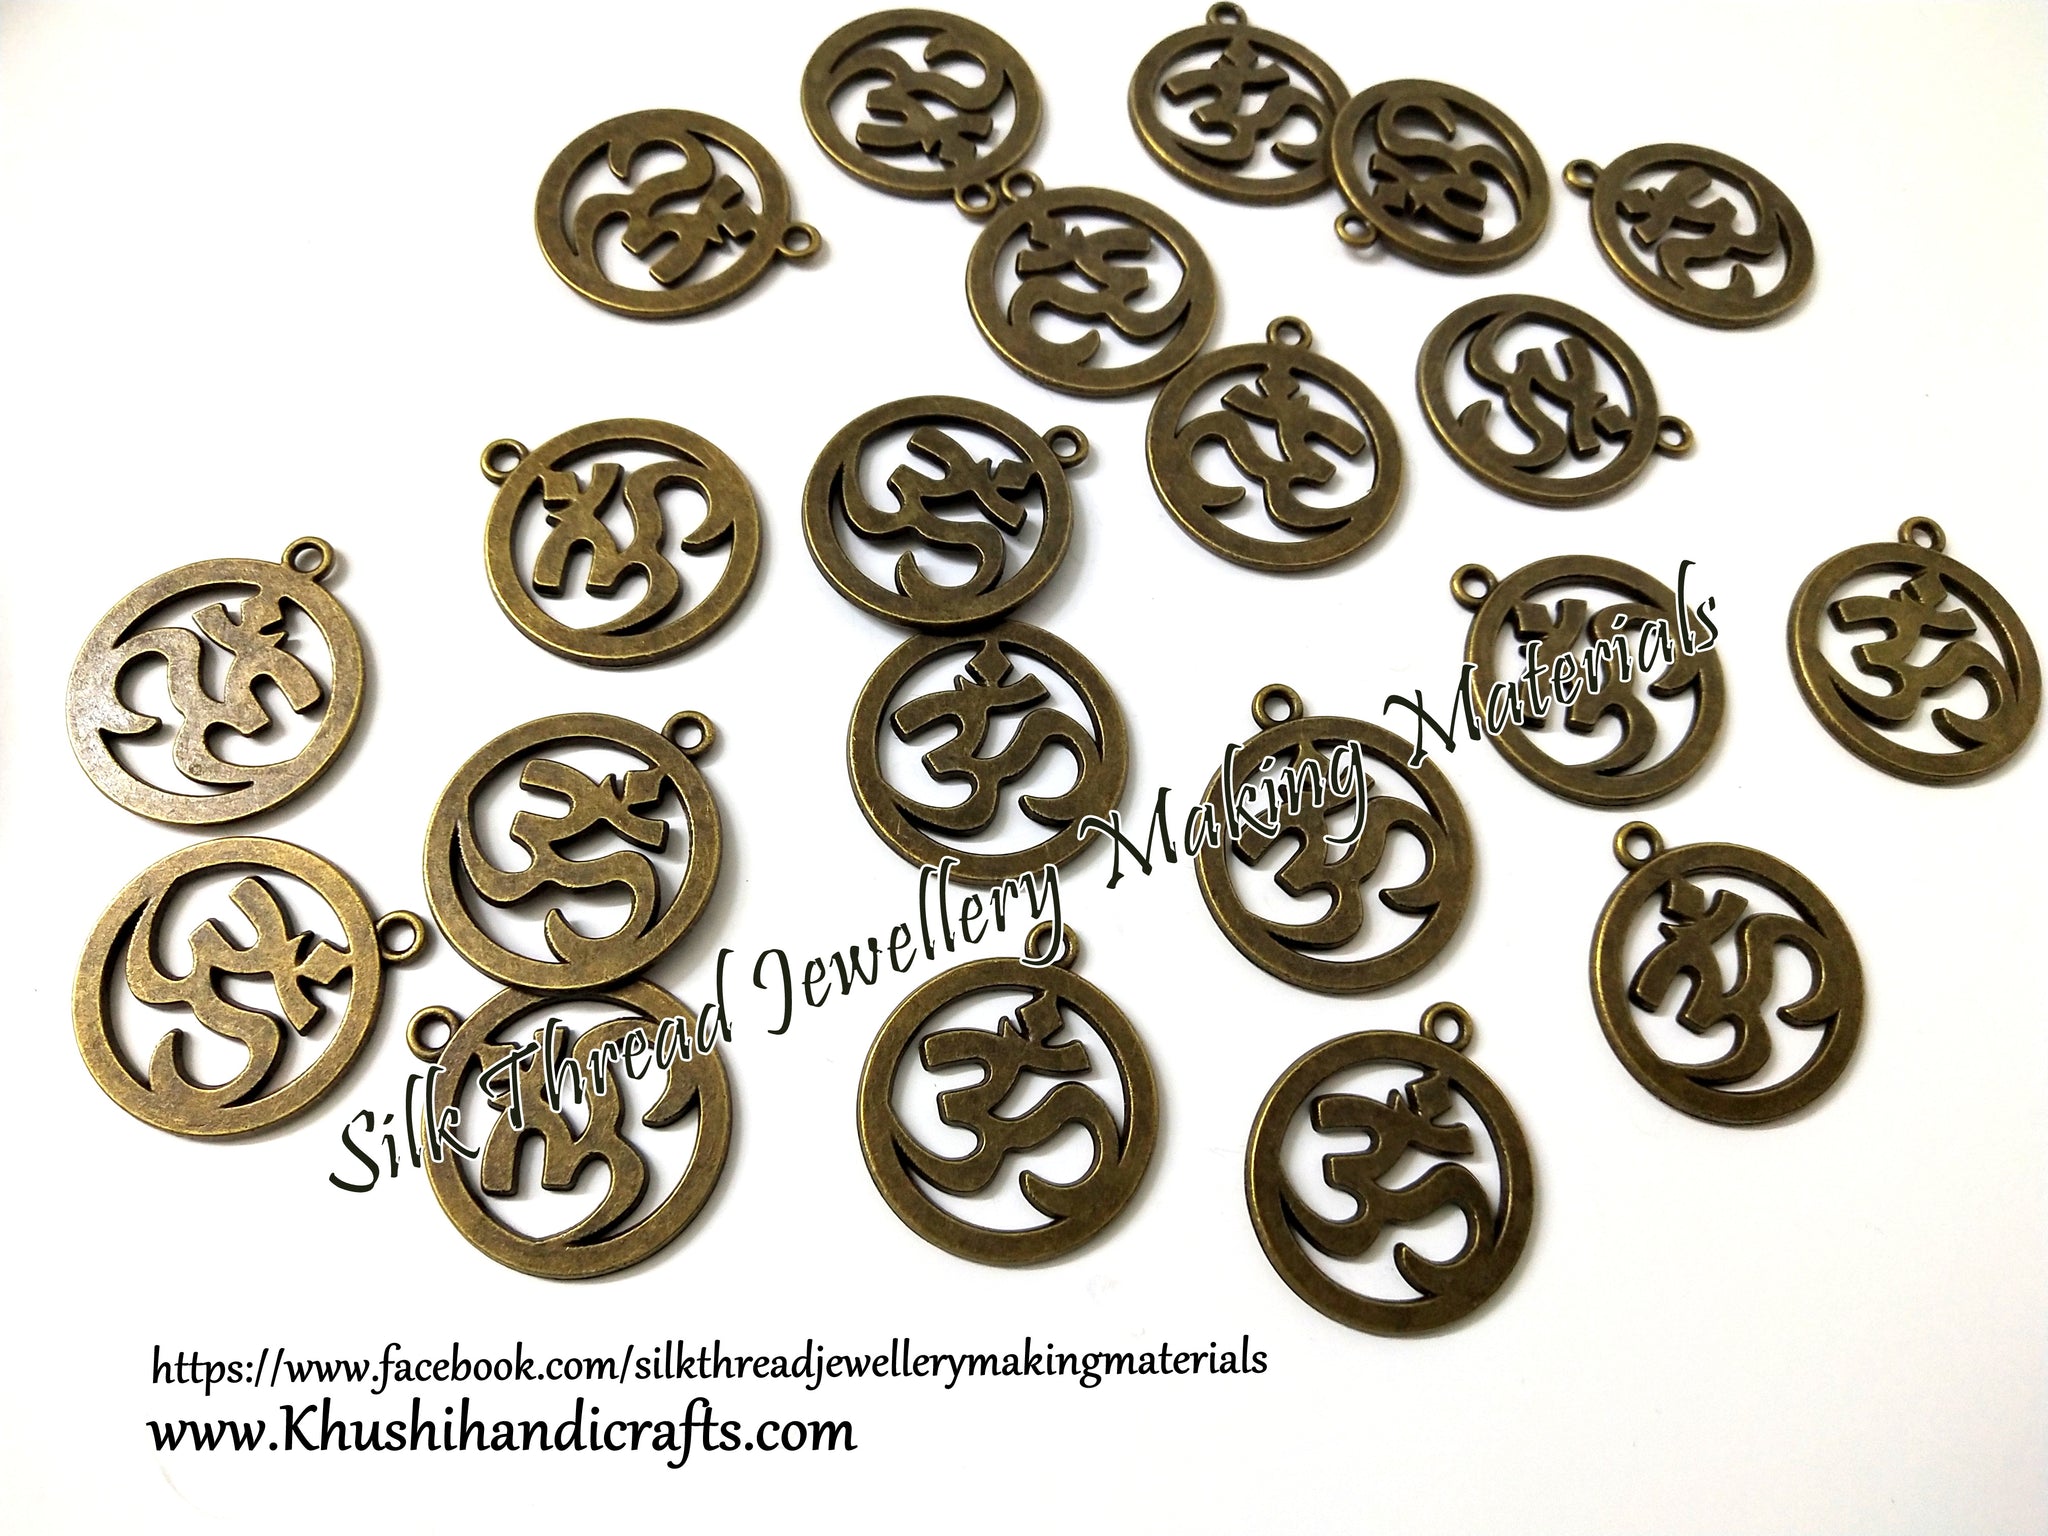 Om charms